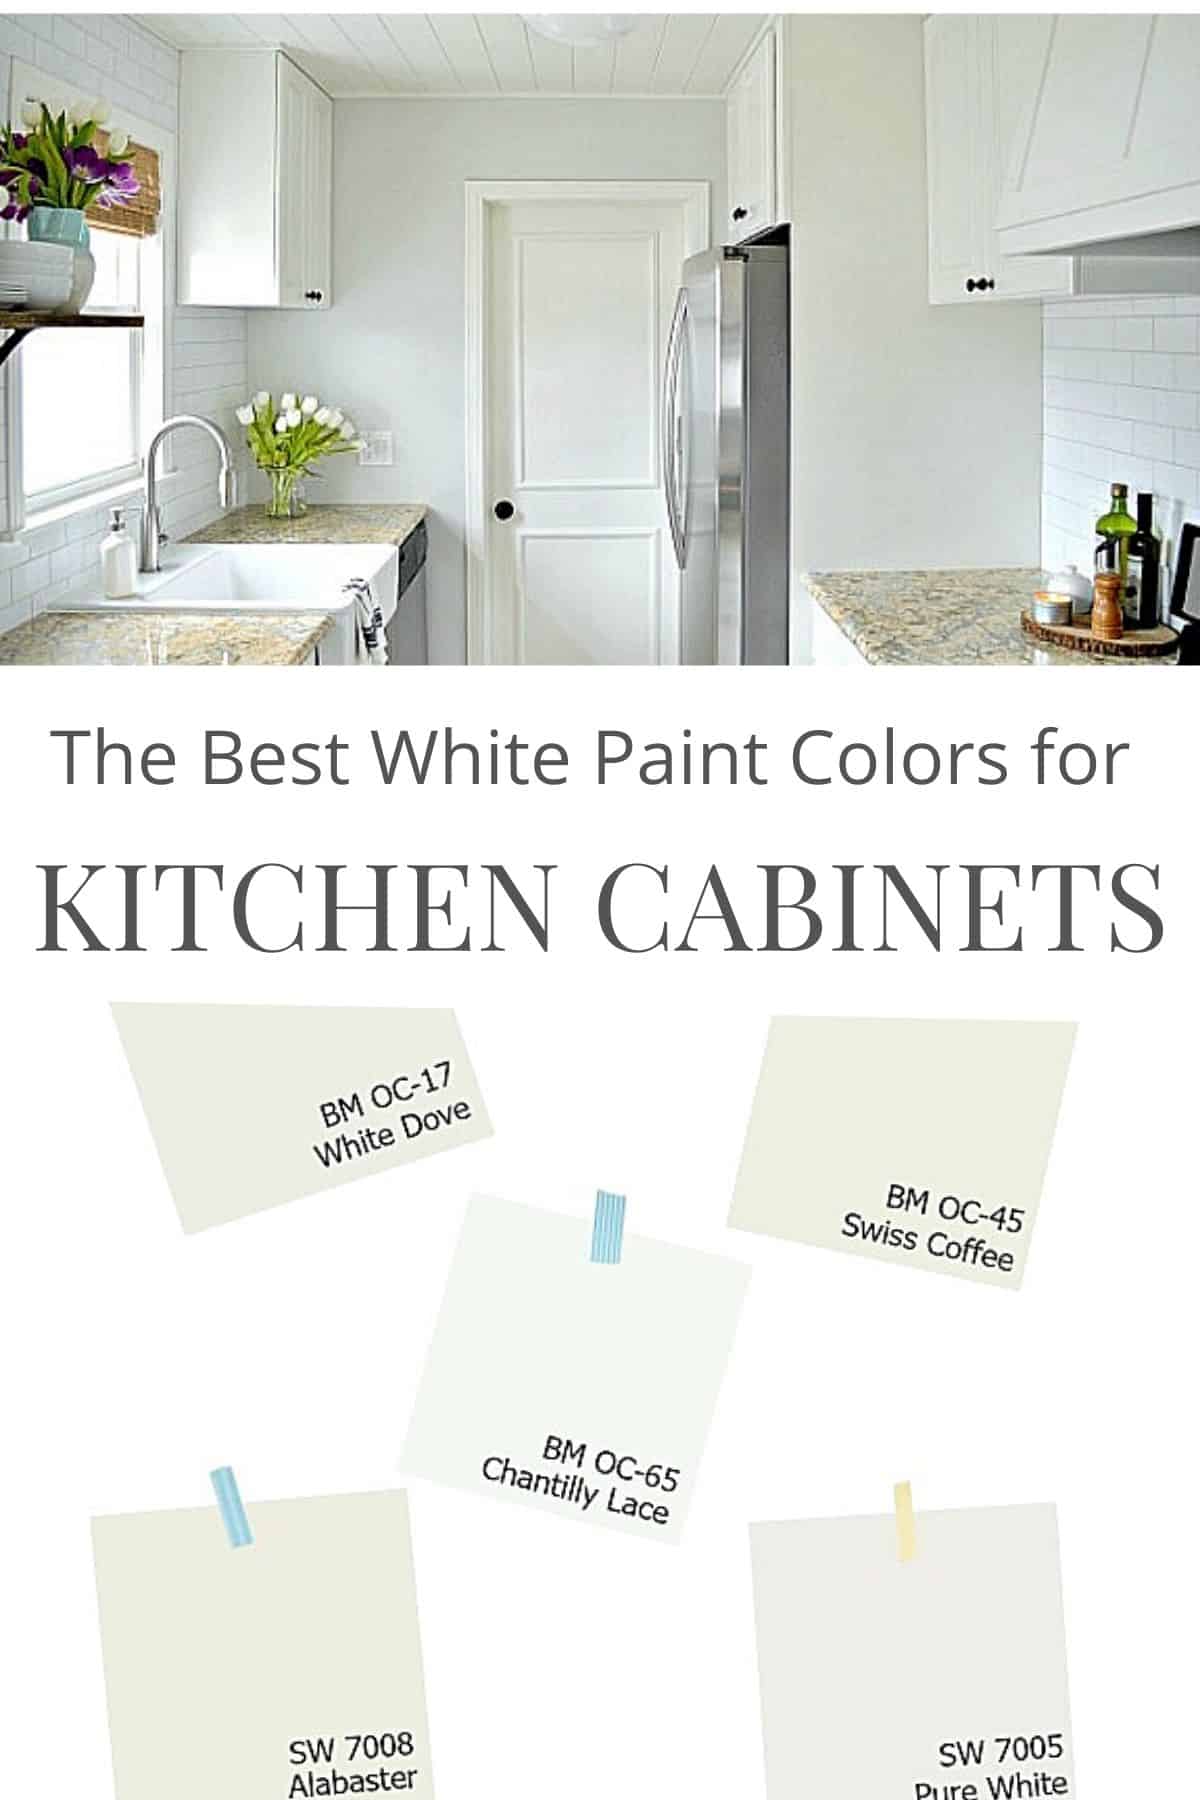 Choosing The Best White Paint Color For, What Is A Good White To Paint Kitchen Cabinets